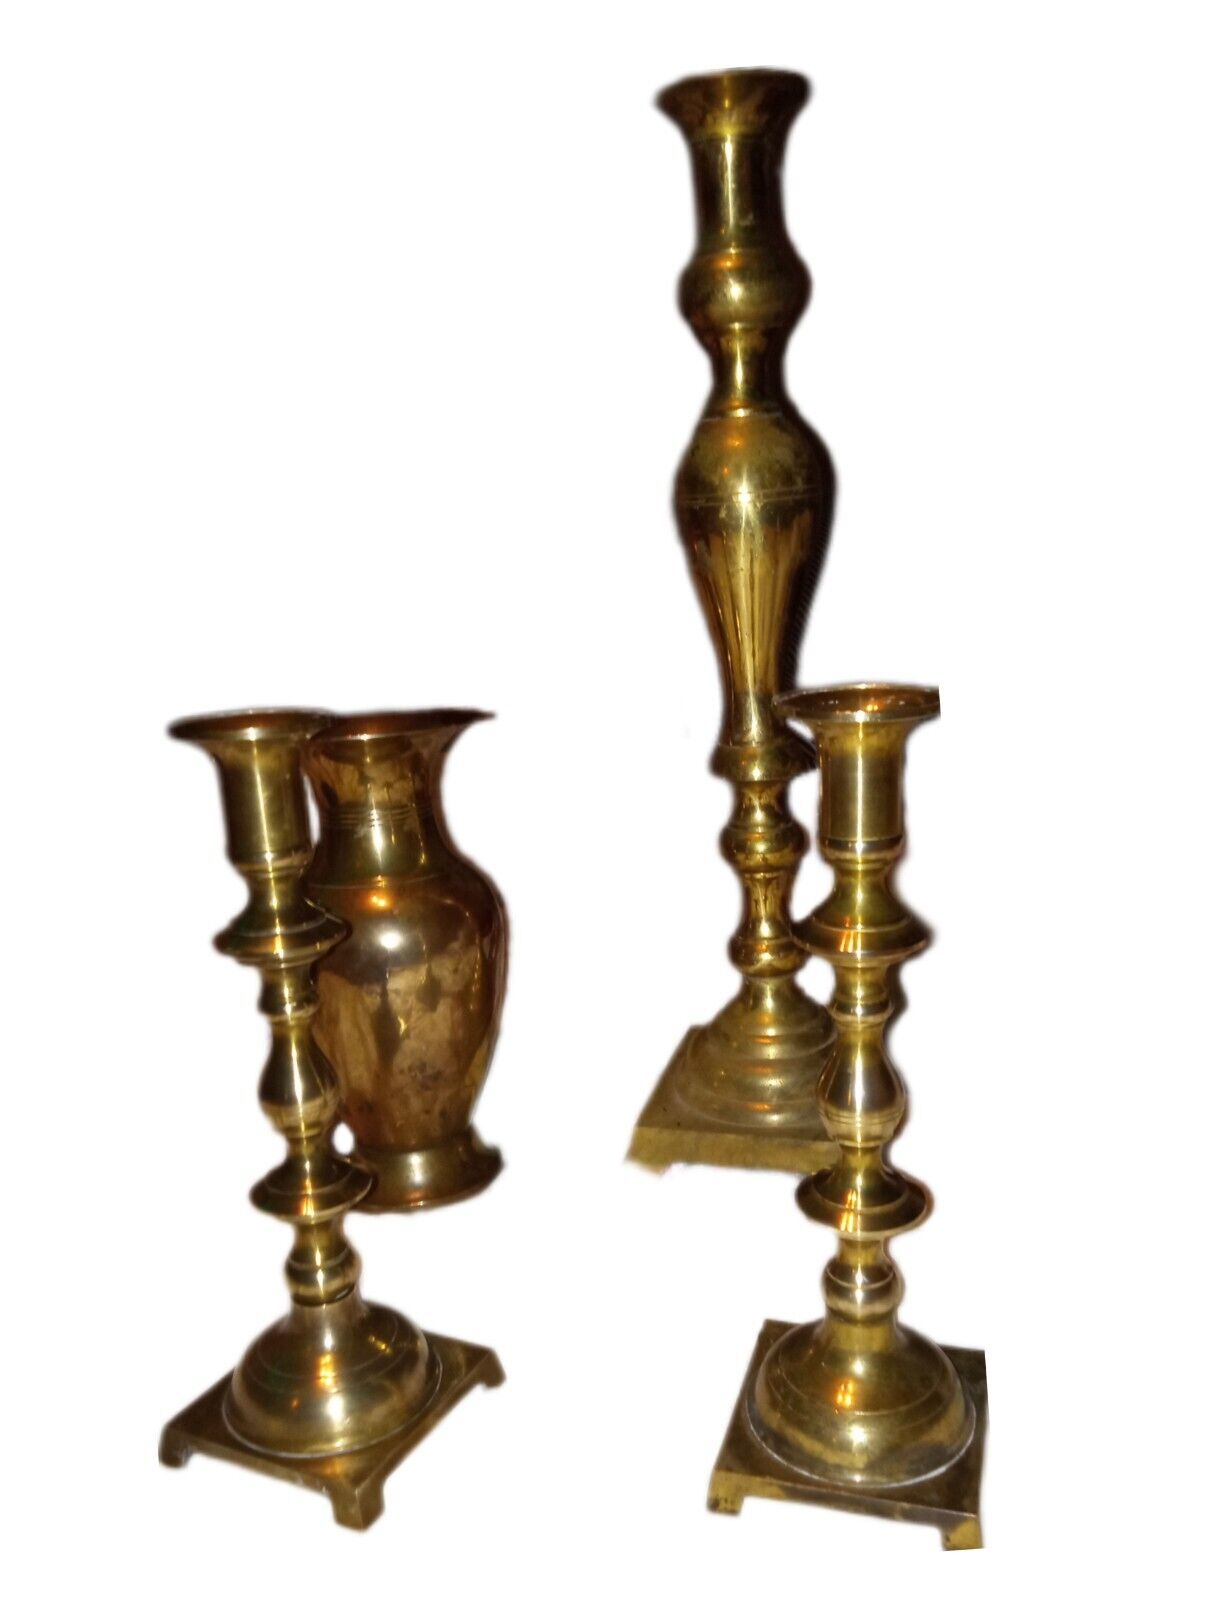 Vintage 4 PC. brass candlestick holders made in Japan set of 3 with Brass Vase